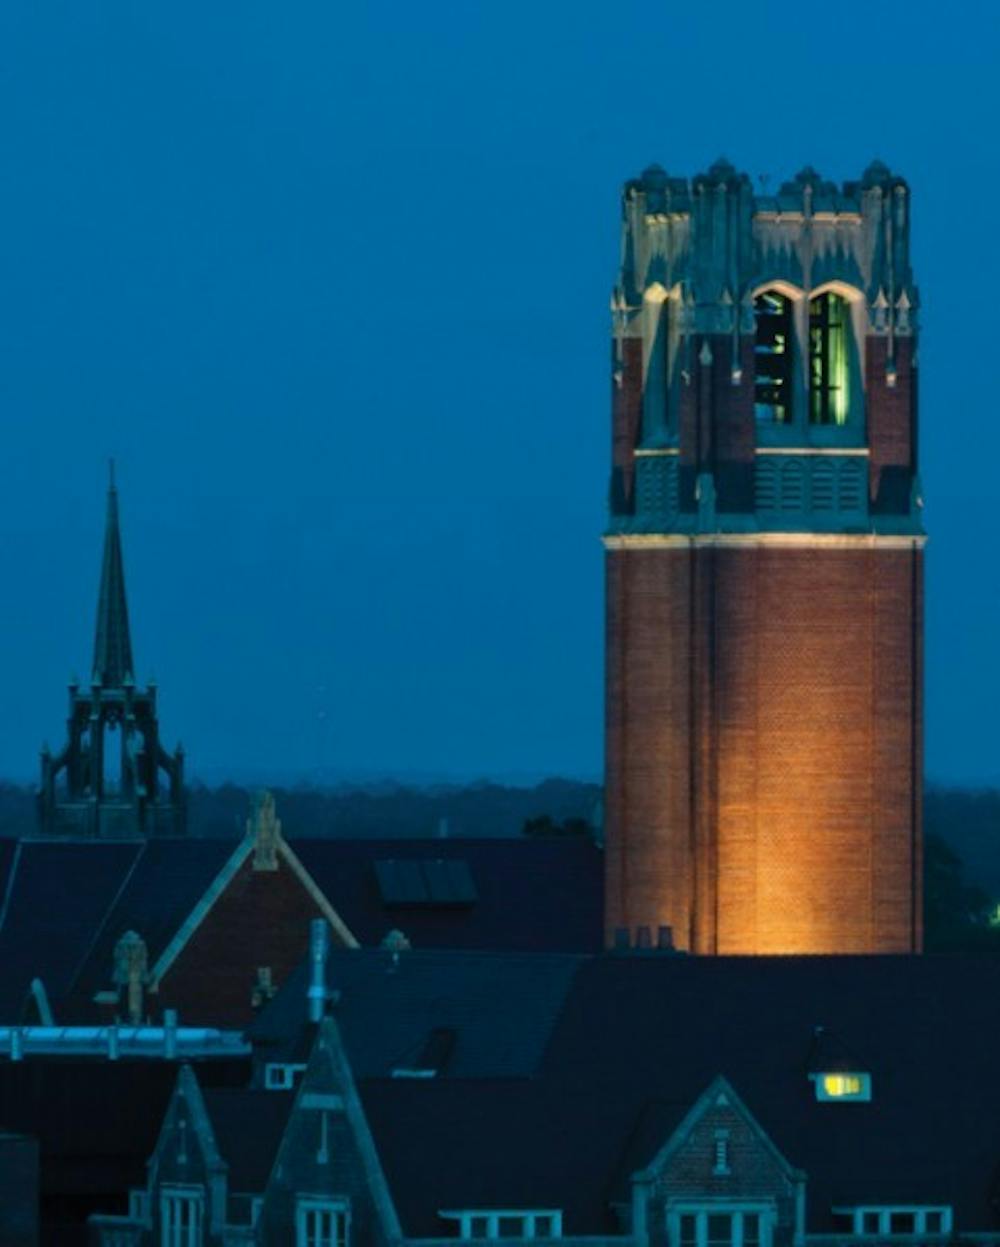 <p>Century Tower is a 157-foot-tall carillon tower in the center of UF’s campus. The carillon bells can be heard each quarter of the hour from 8 a.m. to 8 p.m.</p>